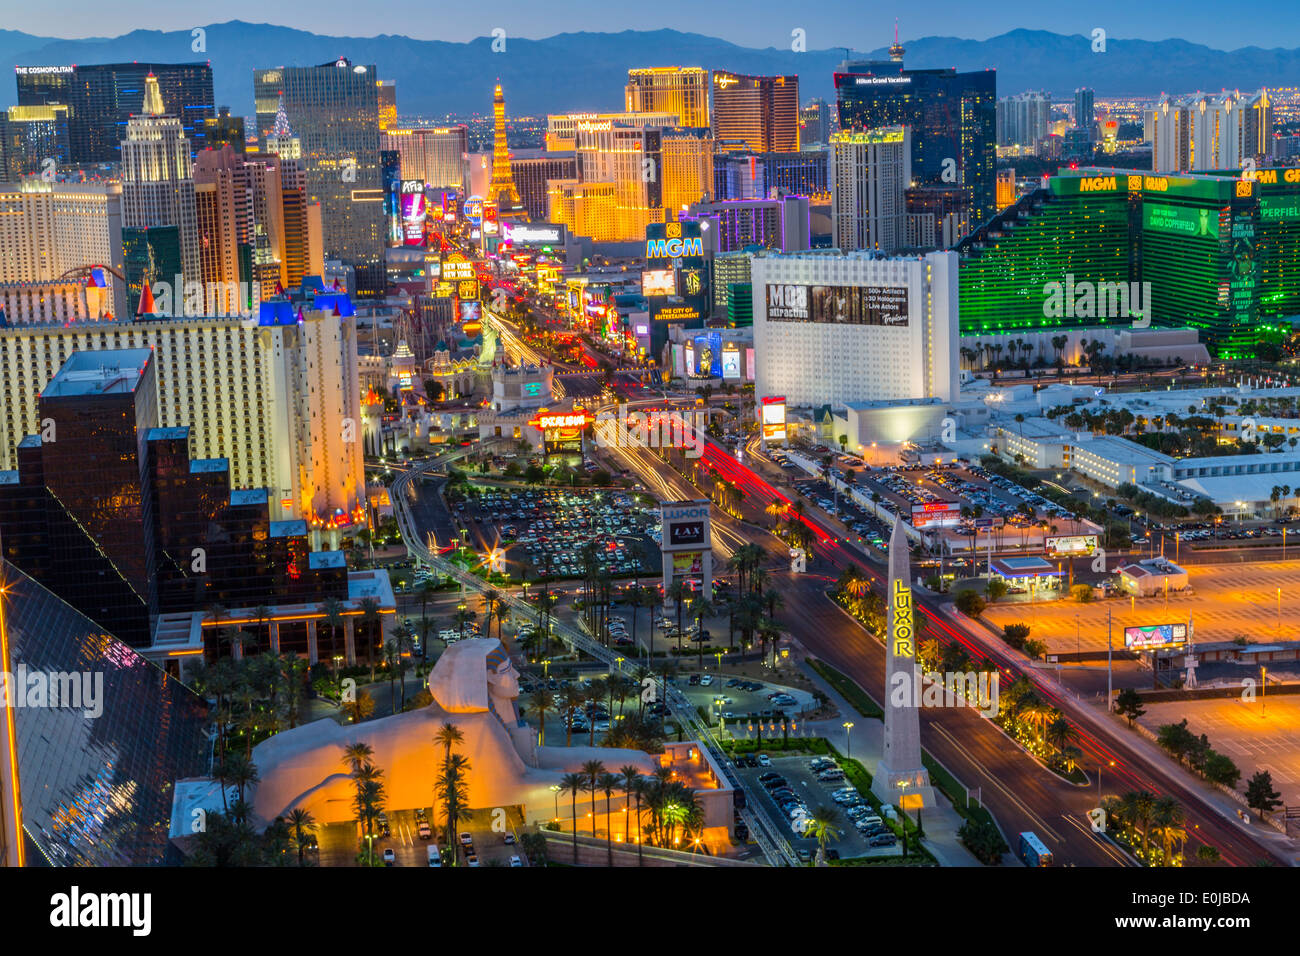 An elevated panoramic landscape view of The Las Vegas strip at dusk with the Luxor Hotel in the foreground, Las Vegas, Nevada USA Stock Photo